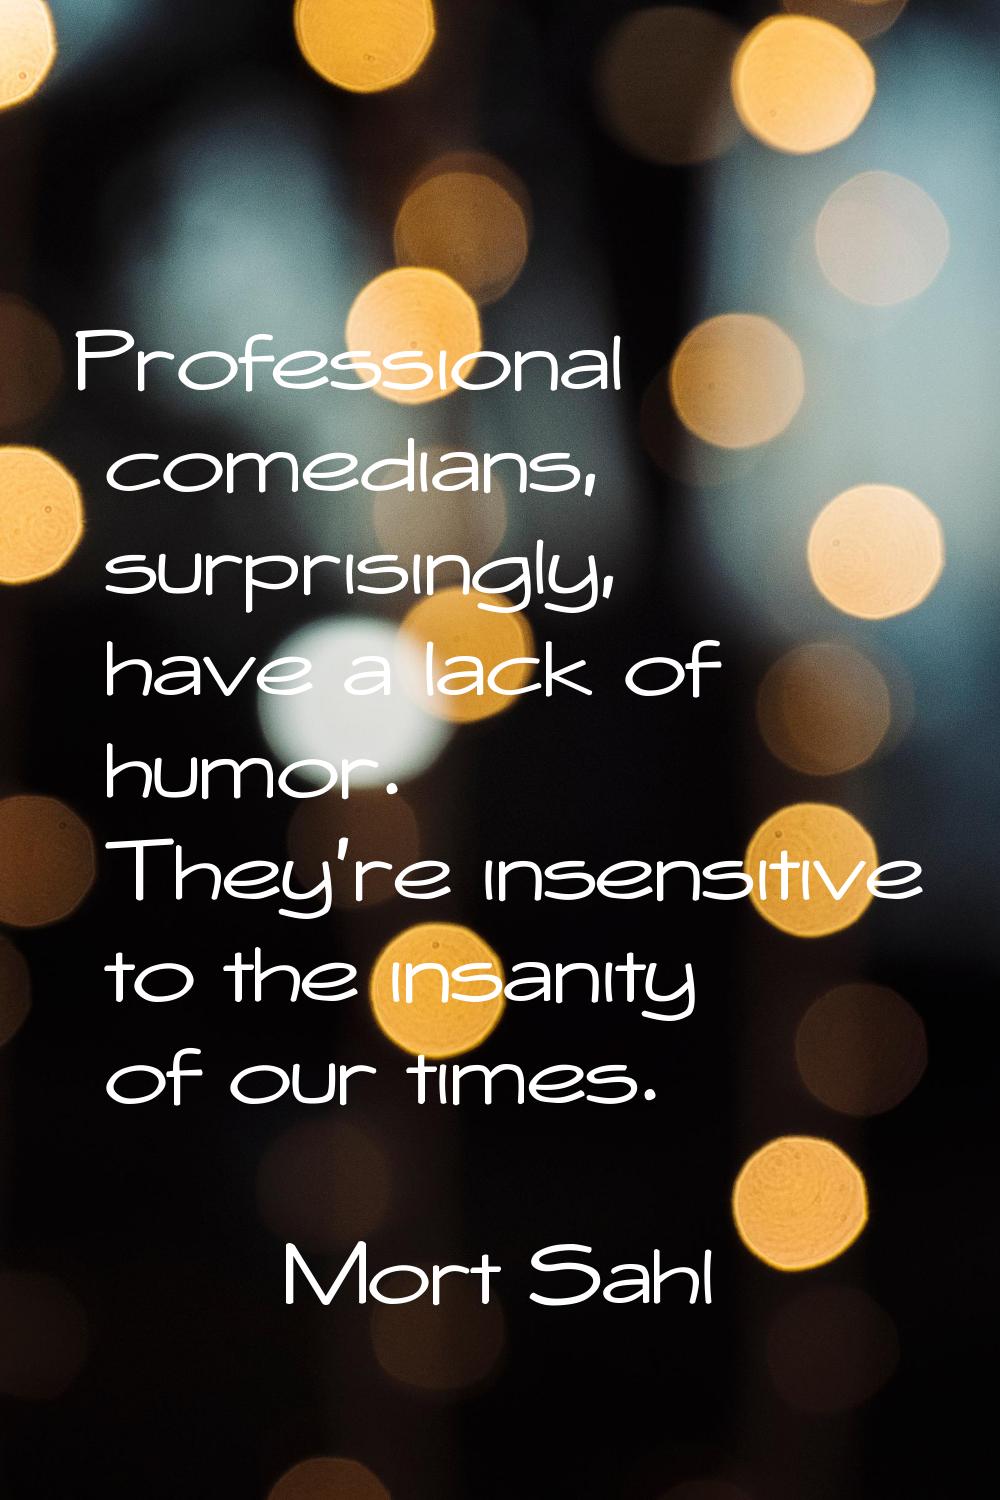 Professional comedians, surprisingly, have a lack of humor. They're insensitive to the insanity of 